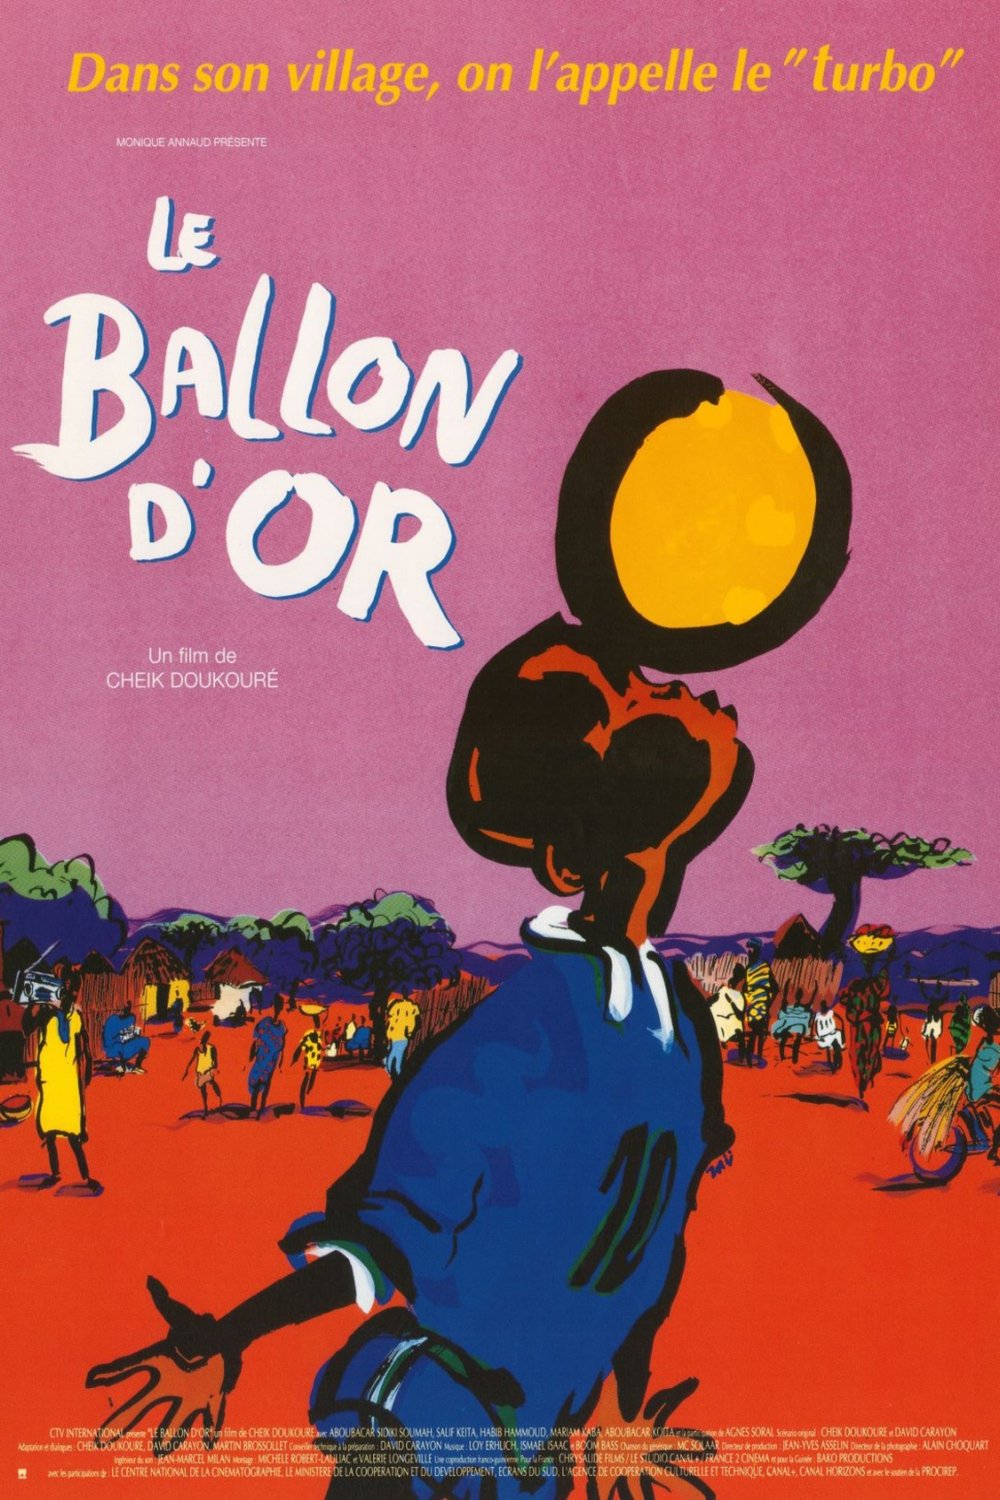 Poster of the movie Le Ballon d'or